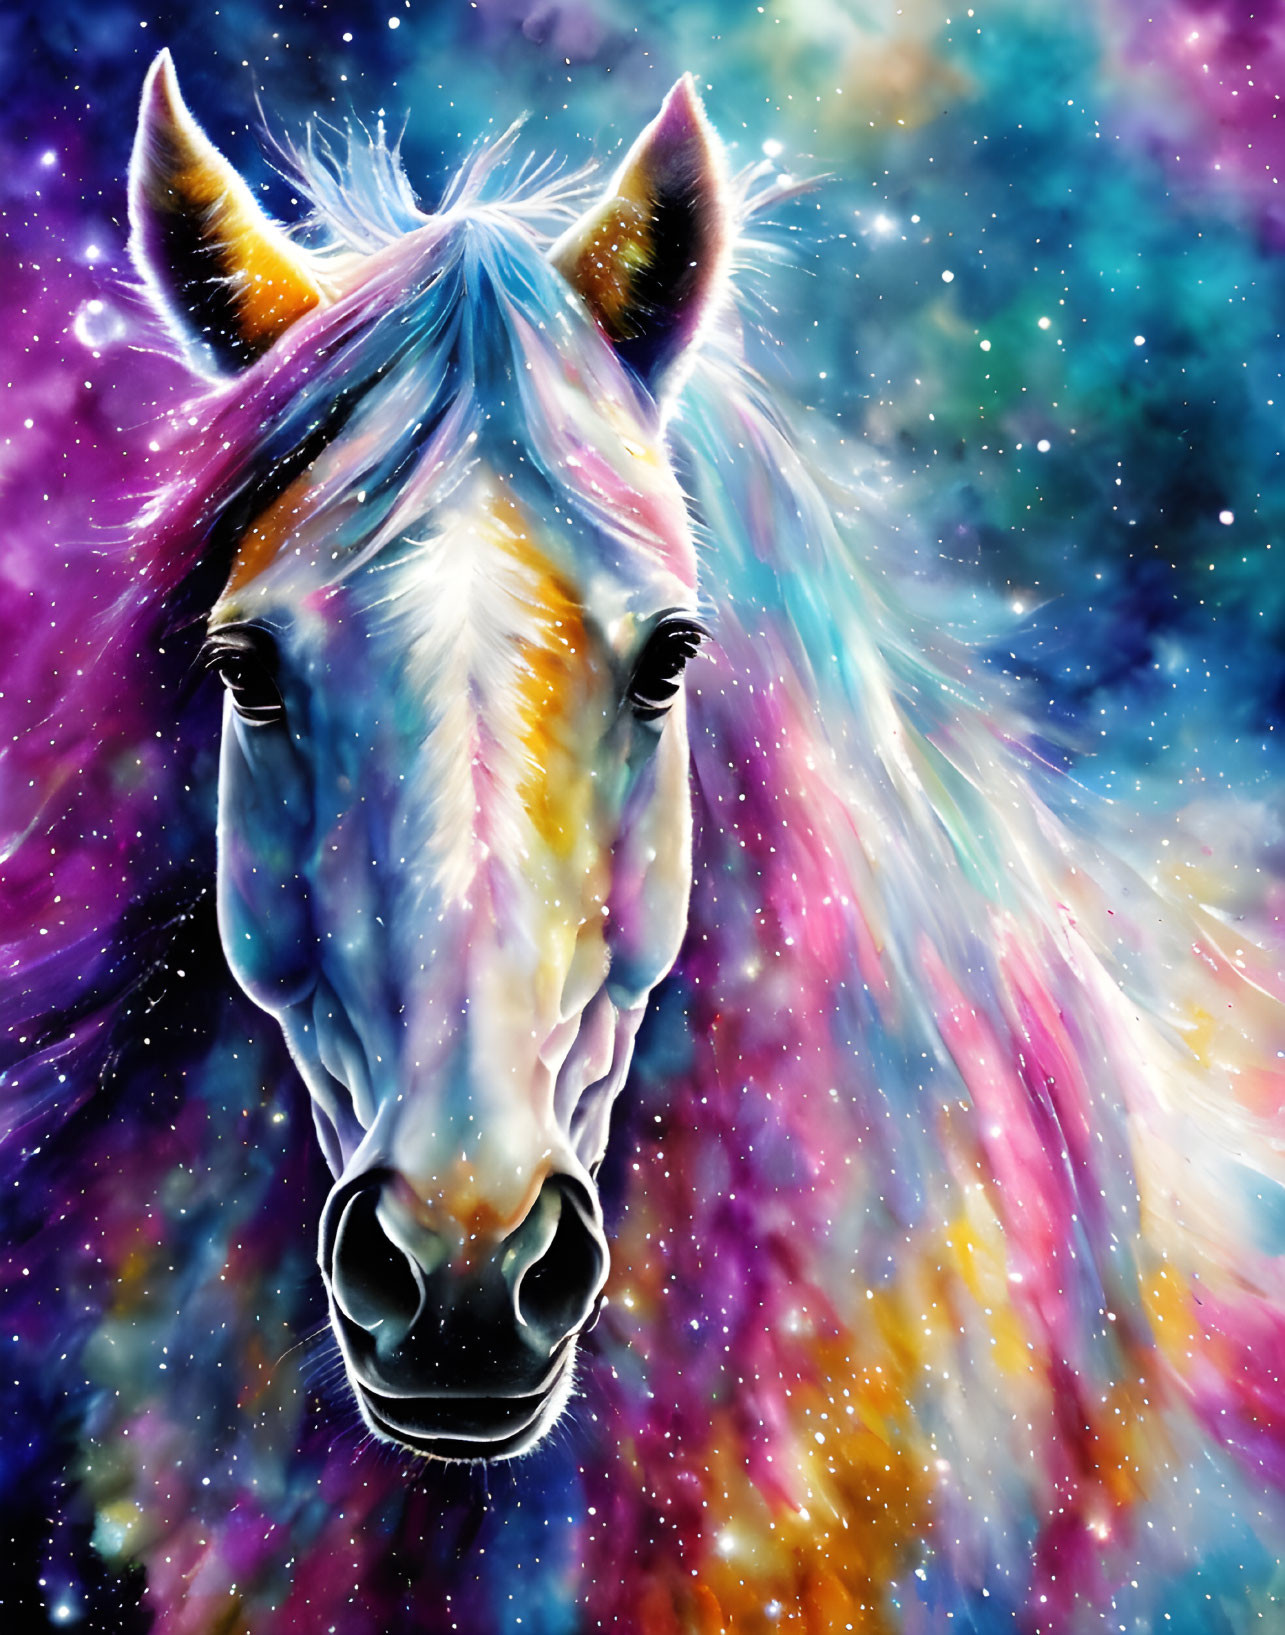 Vibrant horse head illustration with cosmic background